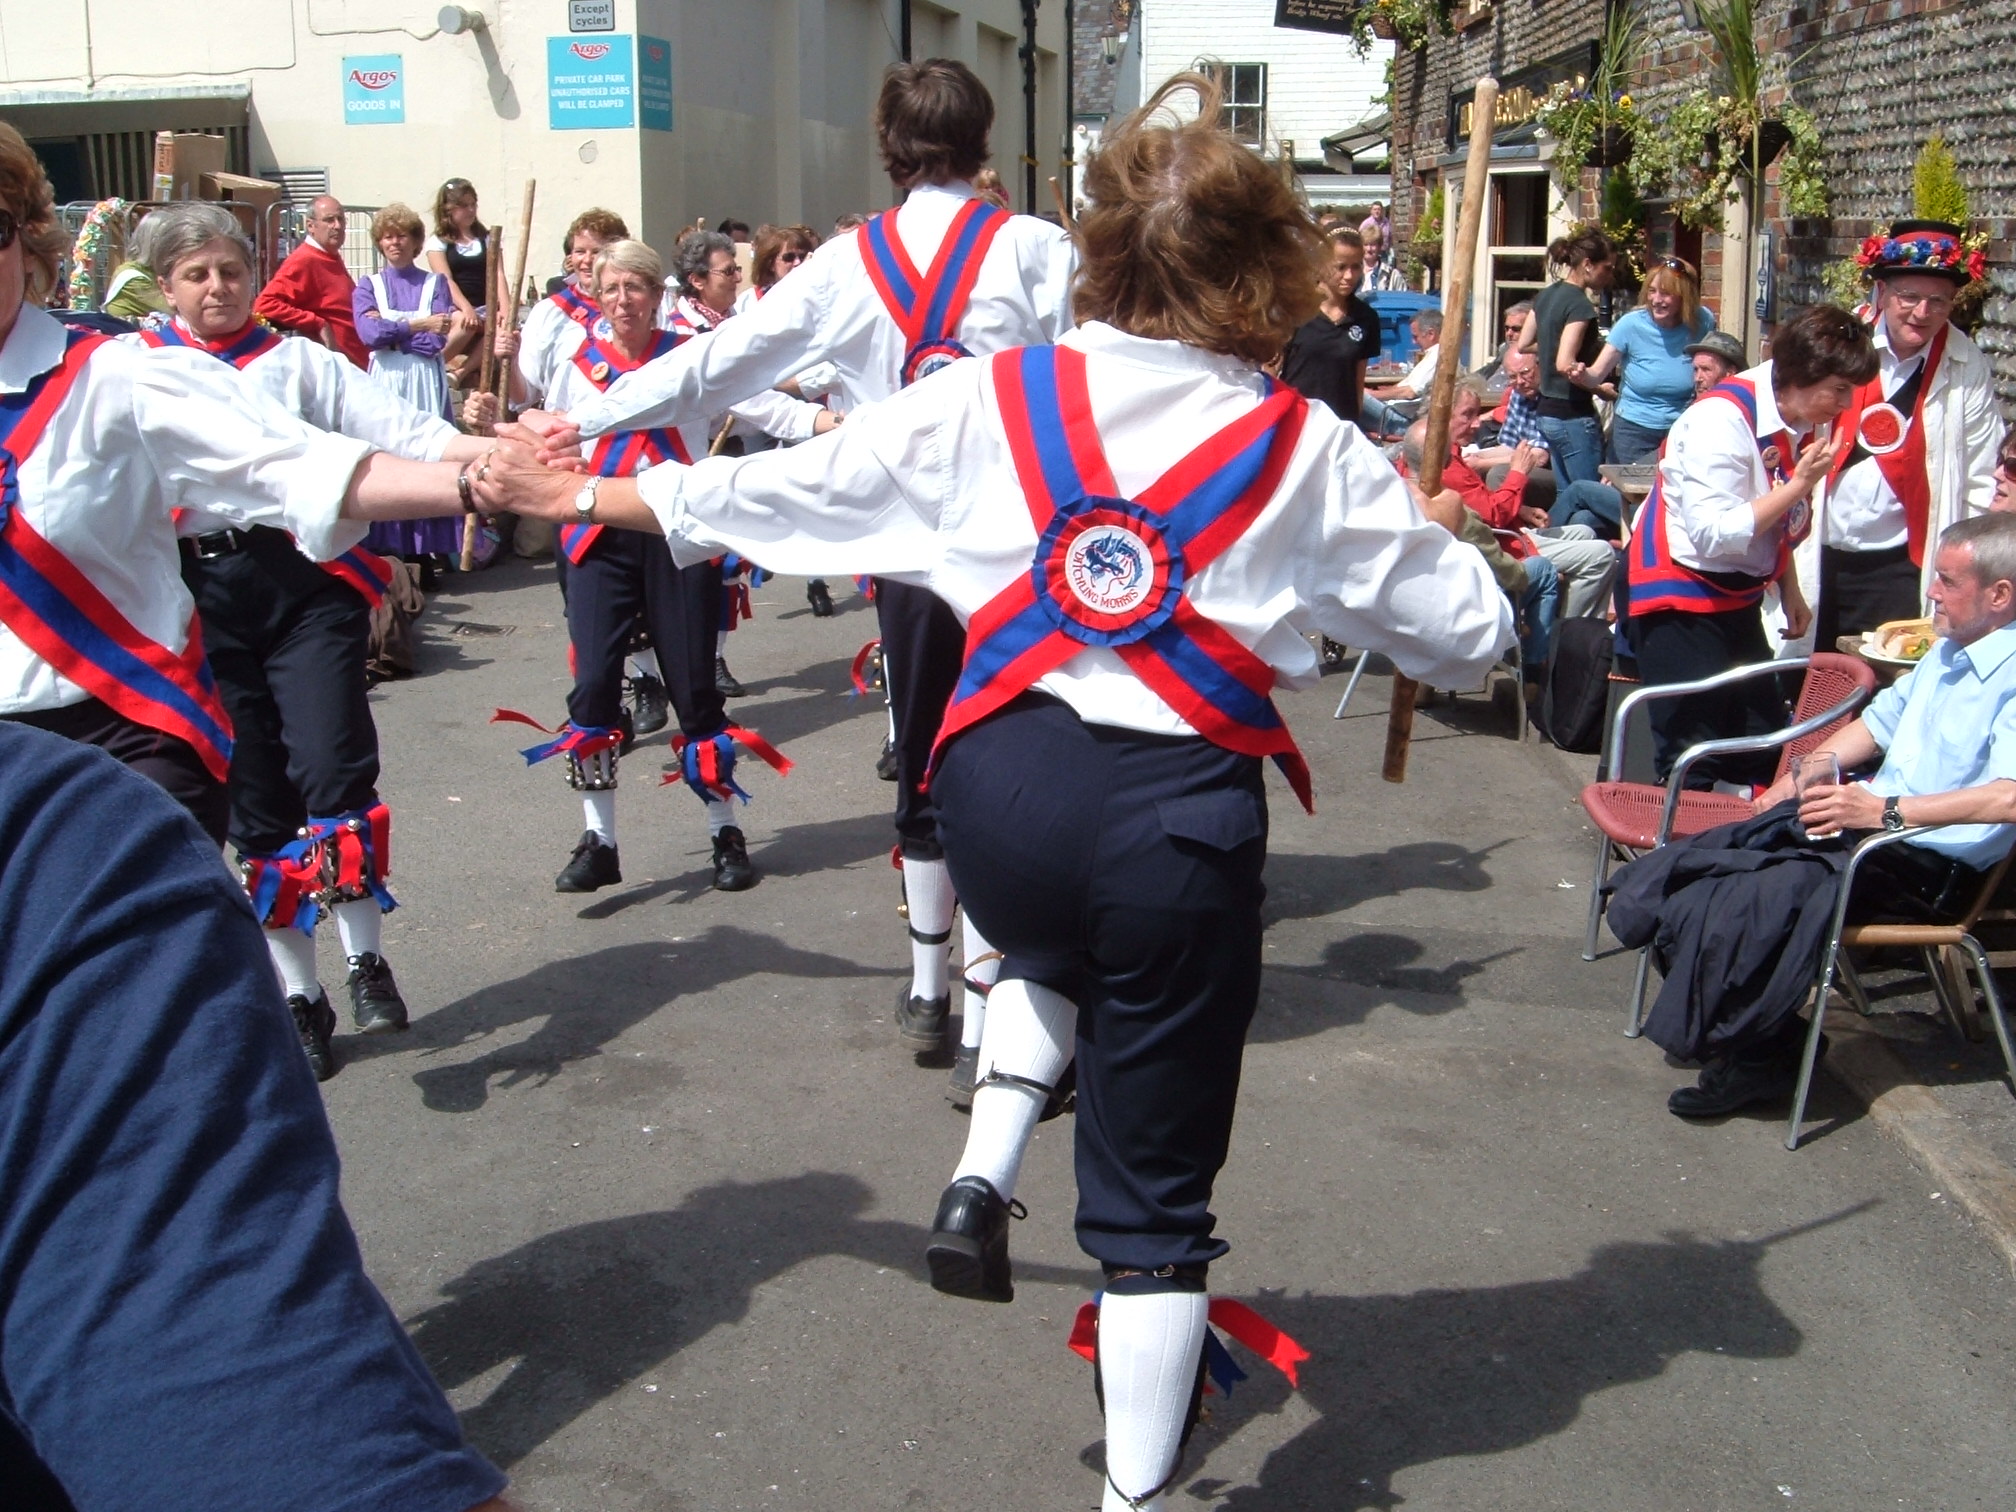 three people wearing red, white and blue uniforms dance in the street